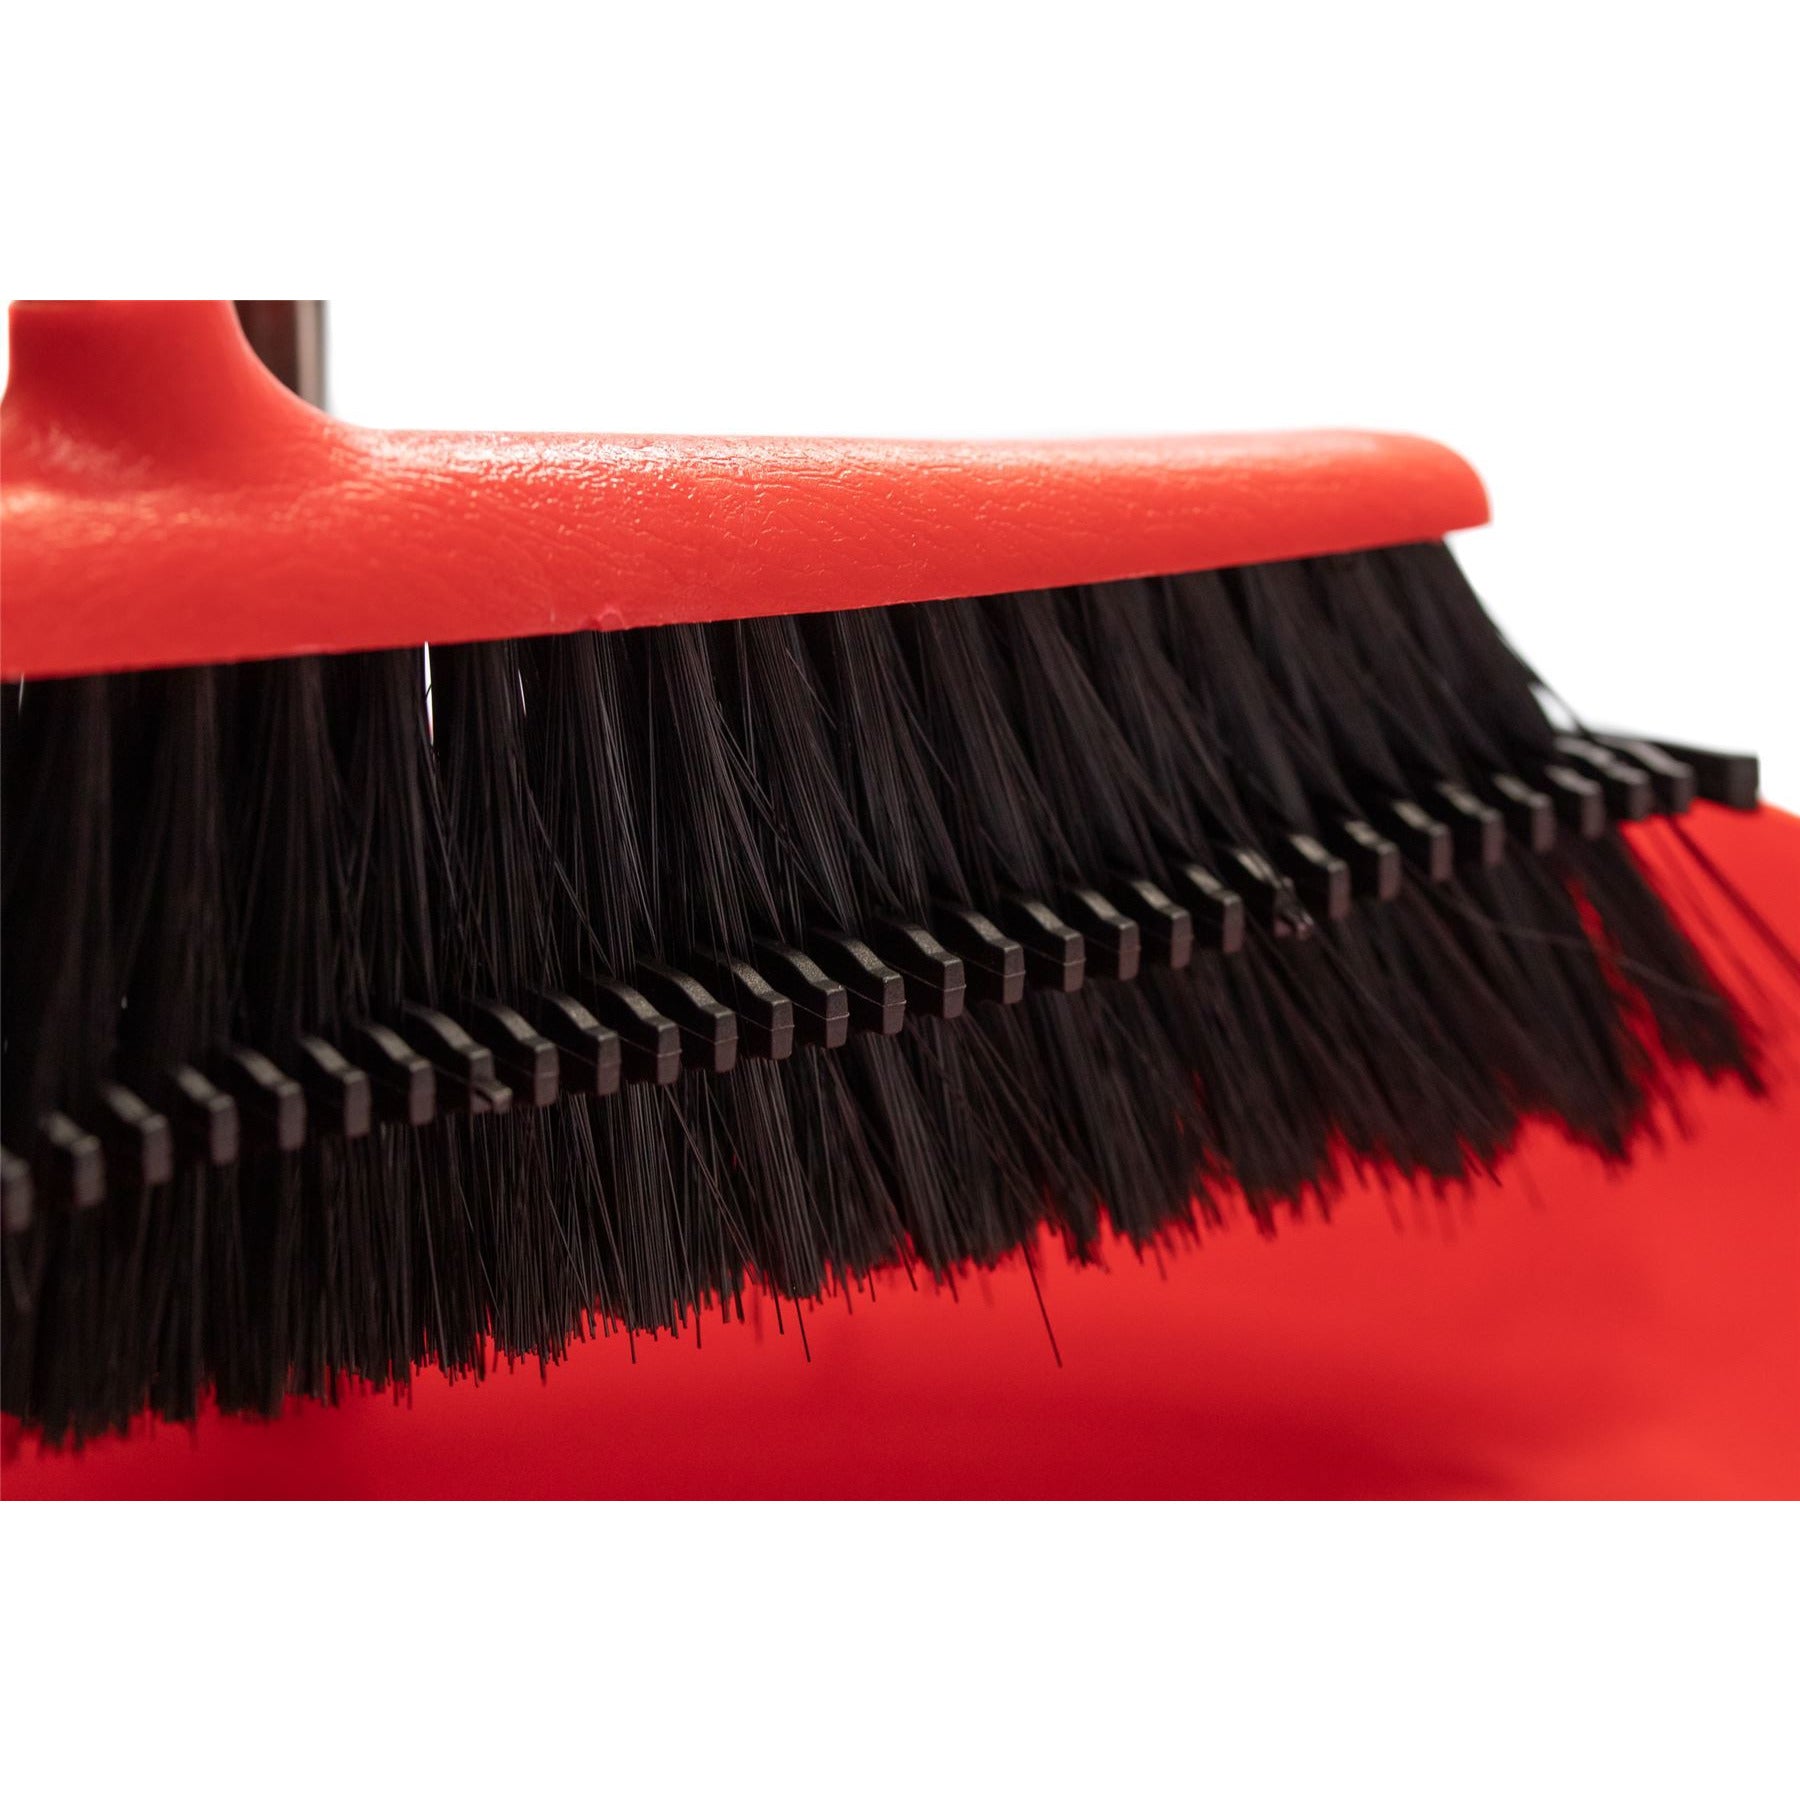 Long Multi Section Handle Dustpan and Brush Set - Red